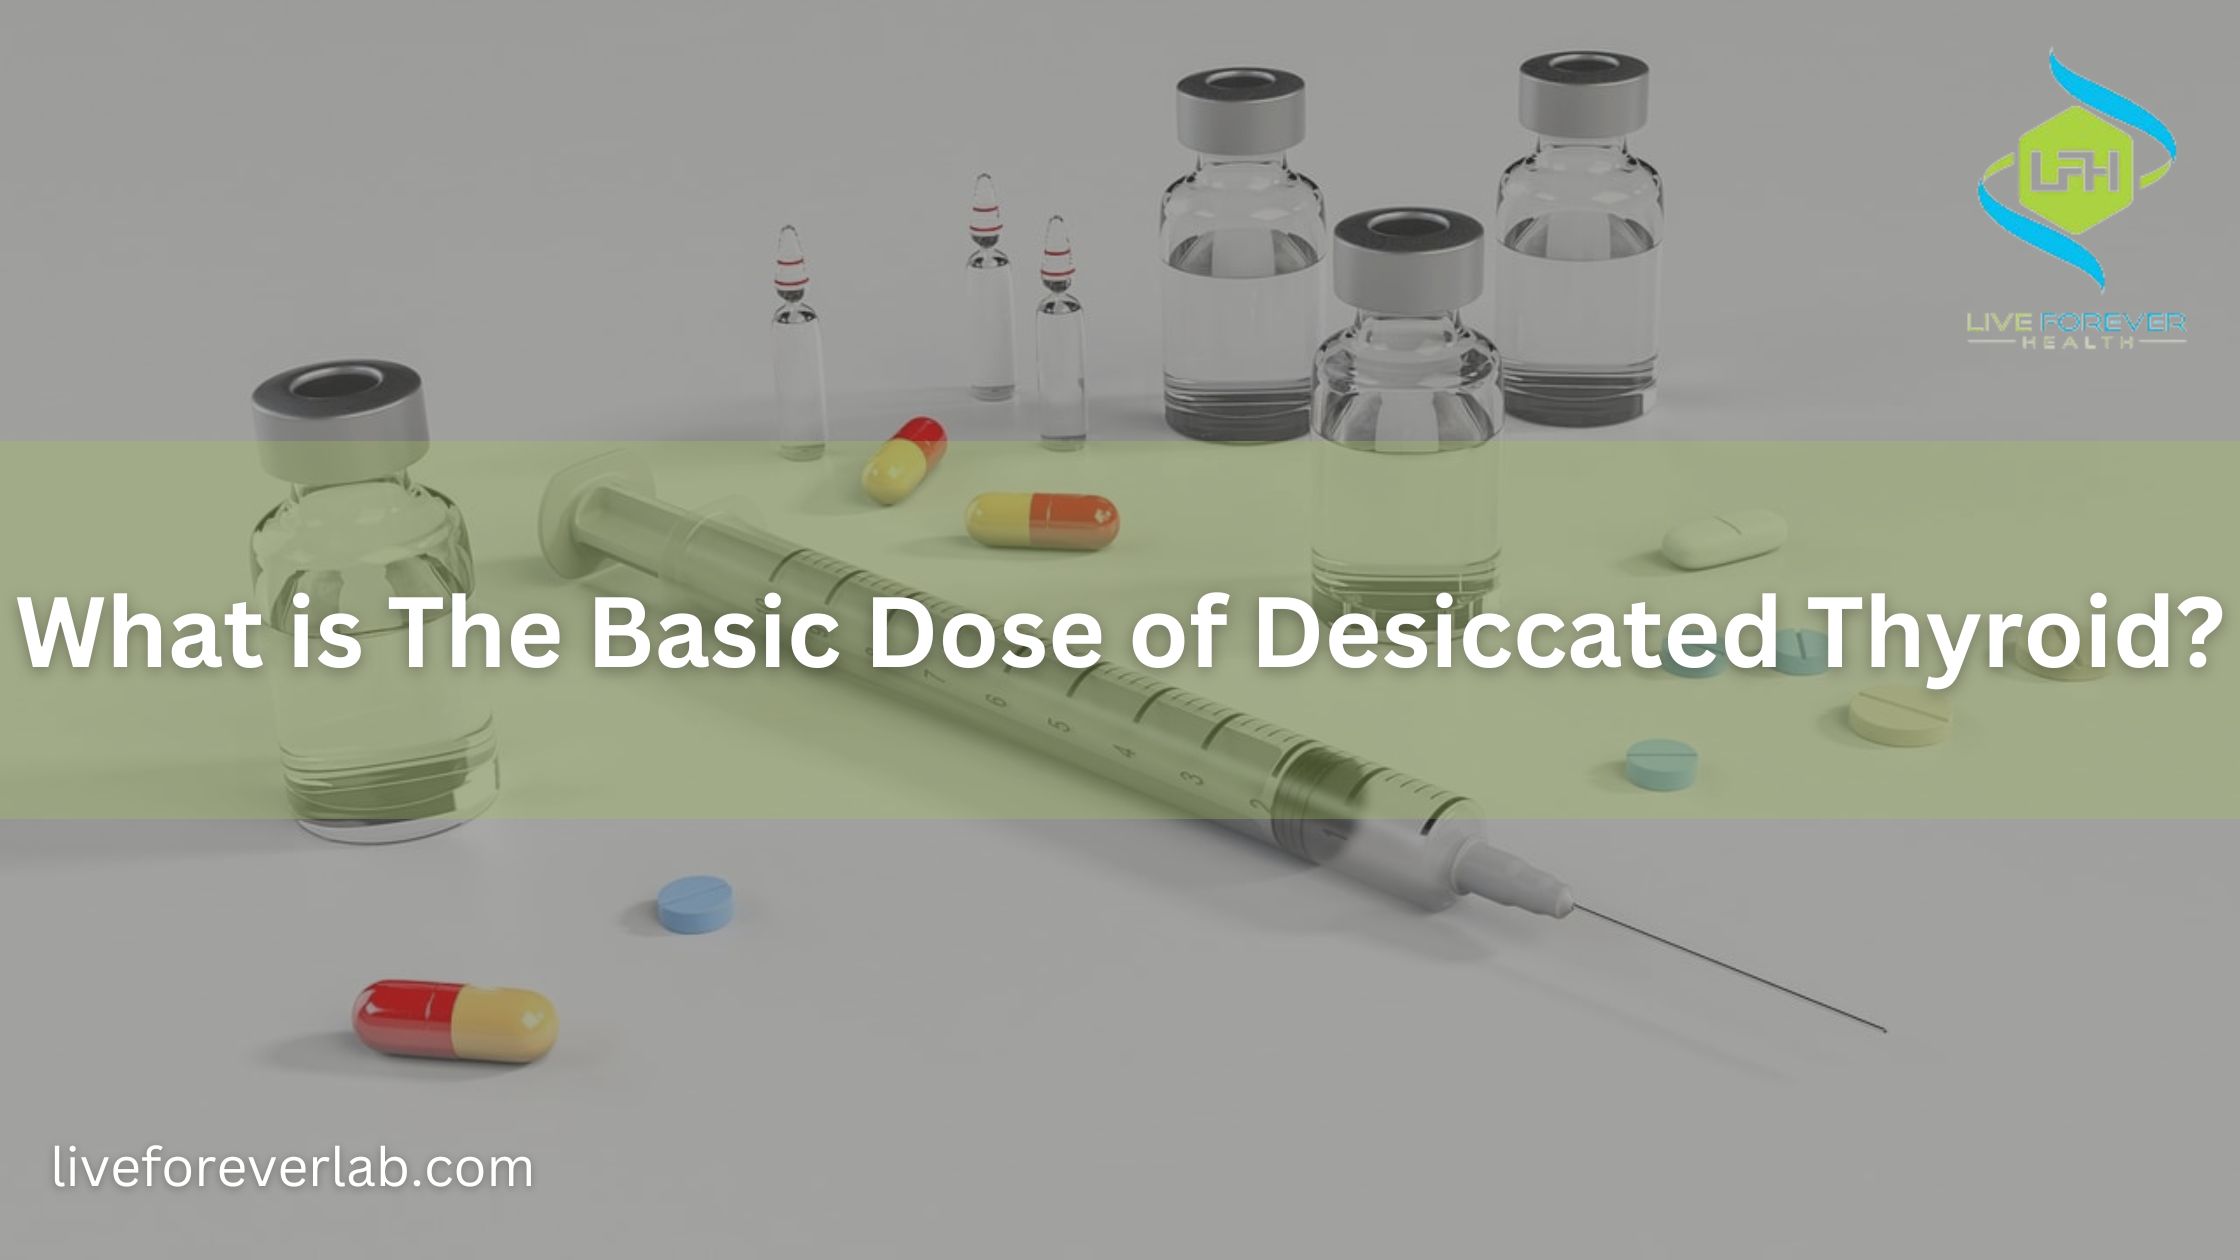 What is The Basic Dose of Desiccated Thyroid